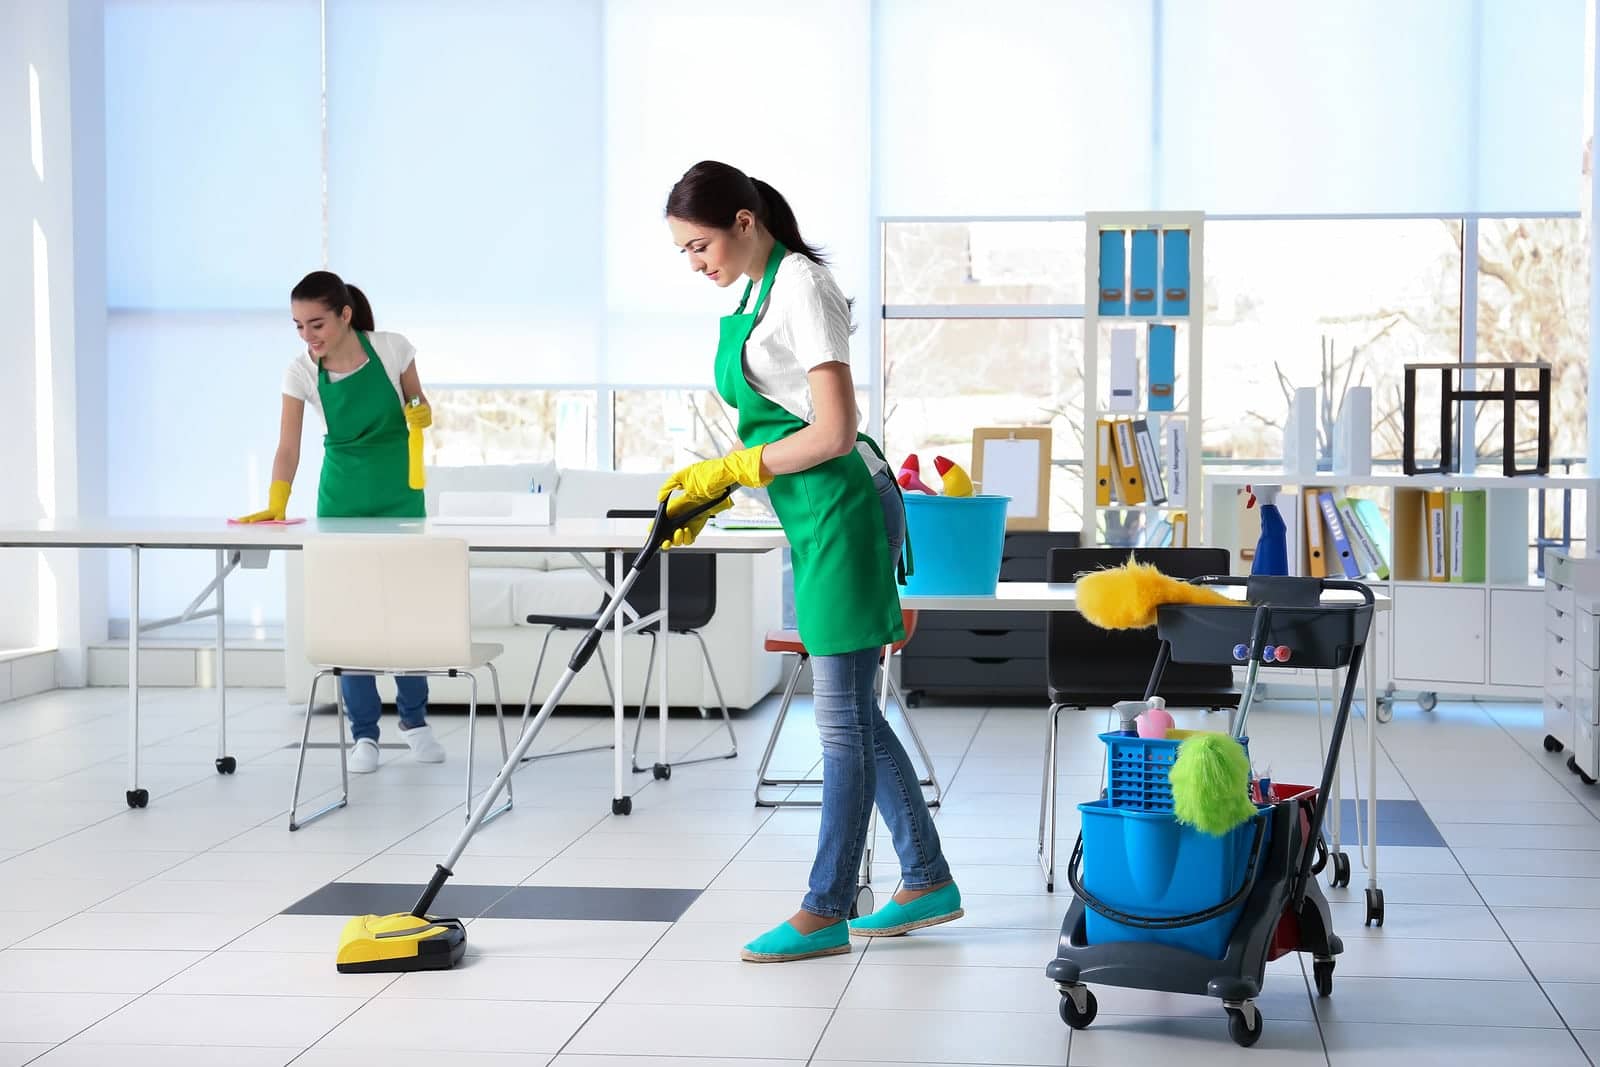 commercial-cleaners-cleaning-office-floors